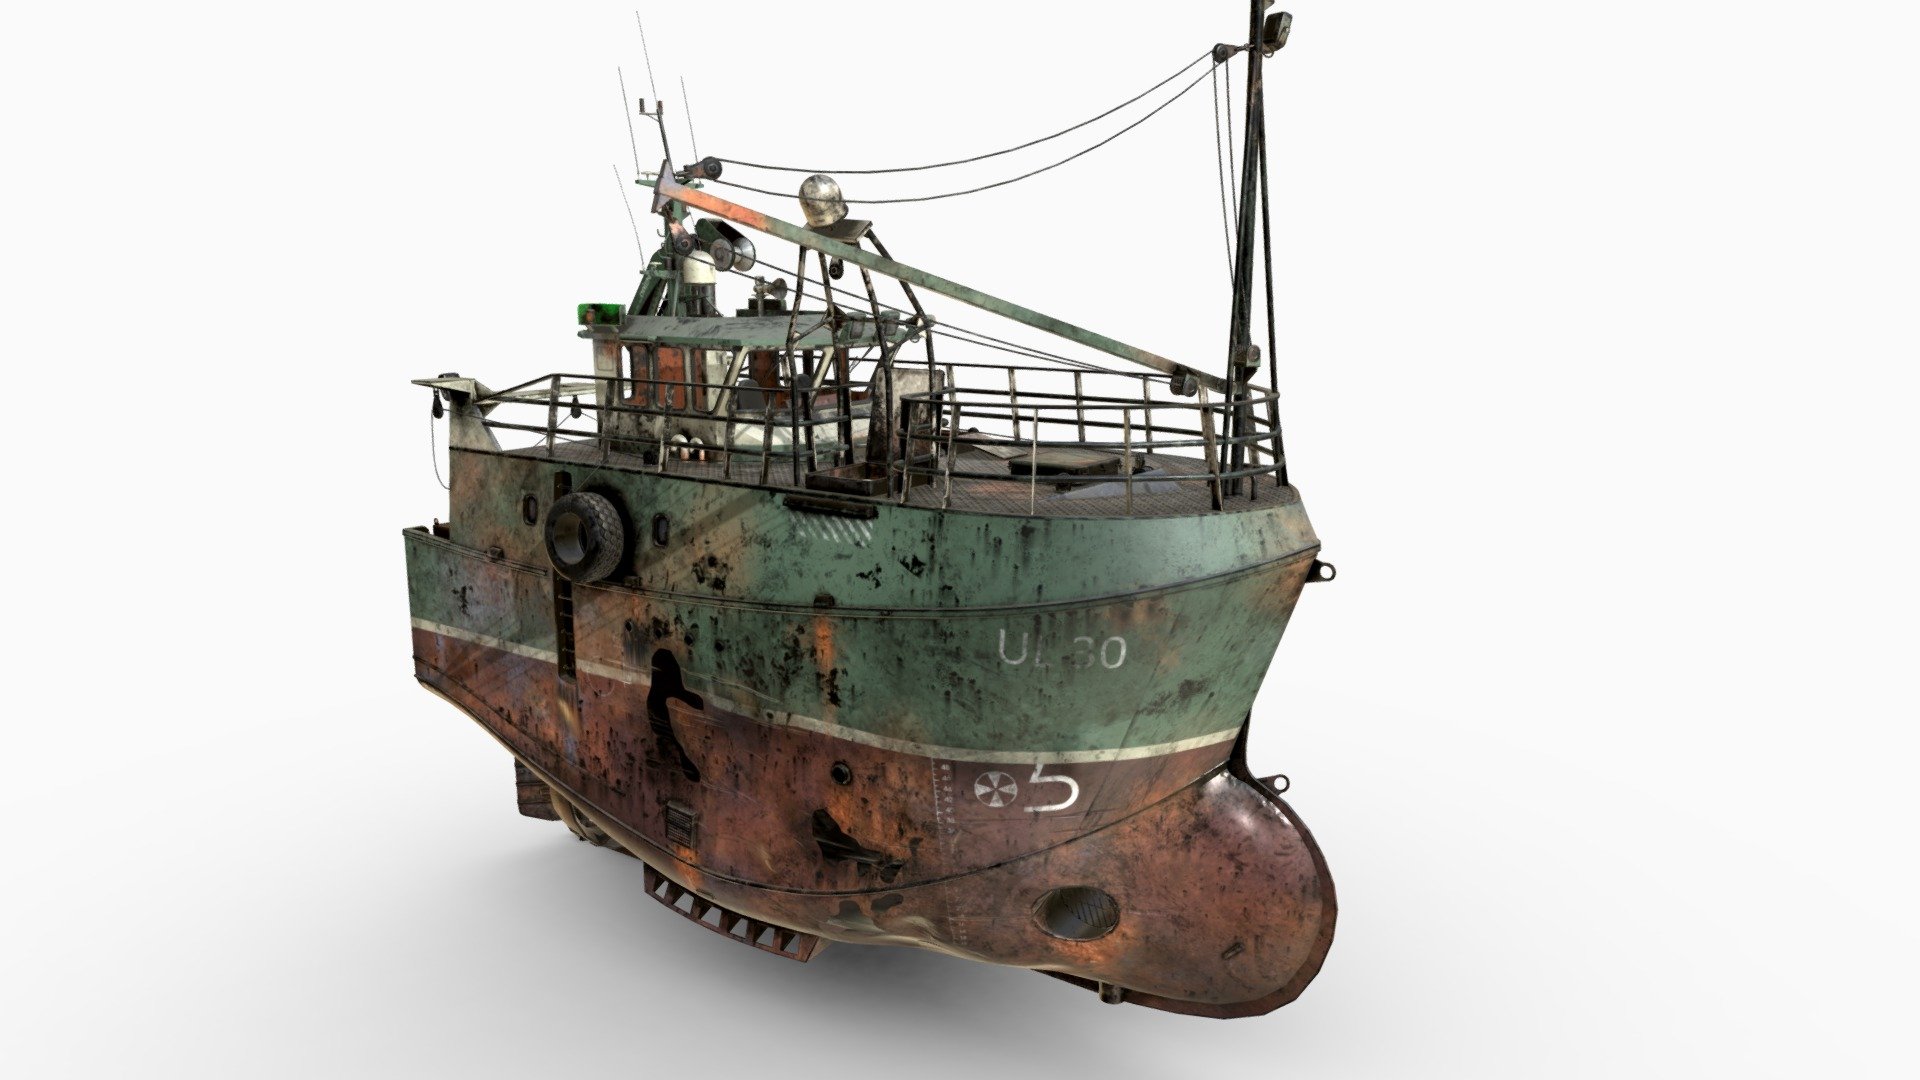 High detailed and realistic 3d model of Fishing Vessel Wreck.

3d files included 3DsMax 2016 , Maya 2018, OBJ, FBX

files included Renderer: Default, Renderer: Arnold, Renderer: V-Ray 3.20.03

forms and proportions of The 3D model most similar to the real object detailed enough for close-up renders the geometry of the model was created very neatly there are no many-sided polygons the model is ready and does not needed smoothing modifiers.

Polygons:-139269

Vertices:- 148508

Textures Formats:

All textures are included in the .zip file.

See my other wrecked ships ! - Fishing broken Trawler - Buy Royalty Free 3D model by IgYerm (@IgorYerm) 3d model